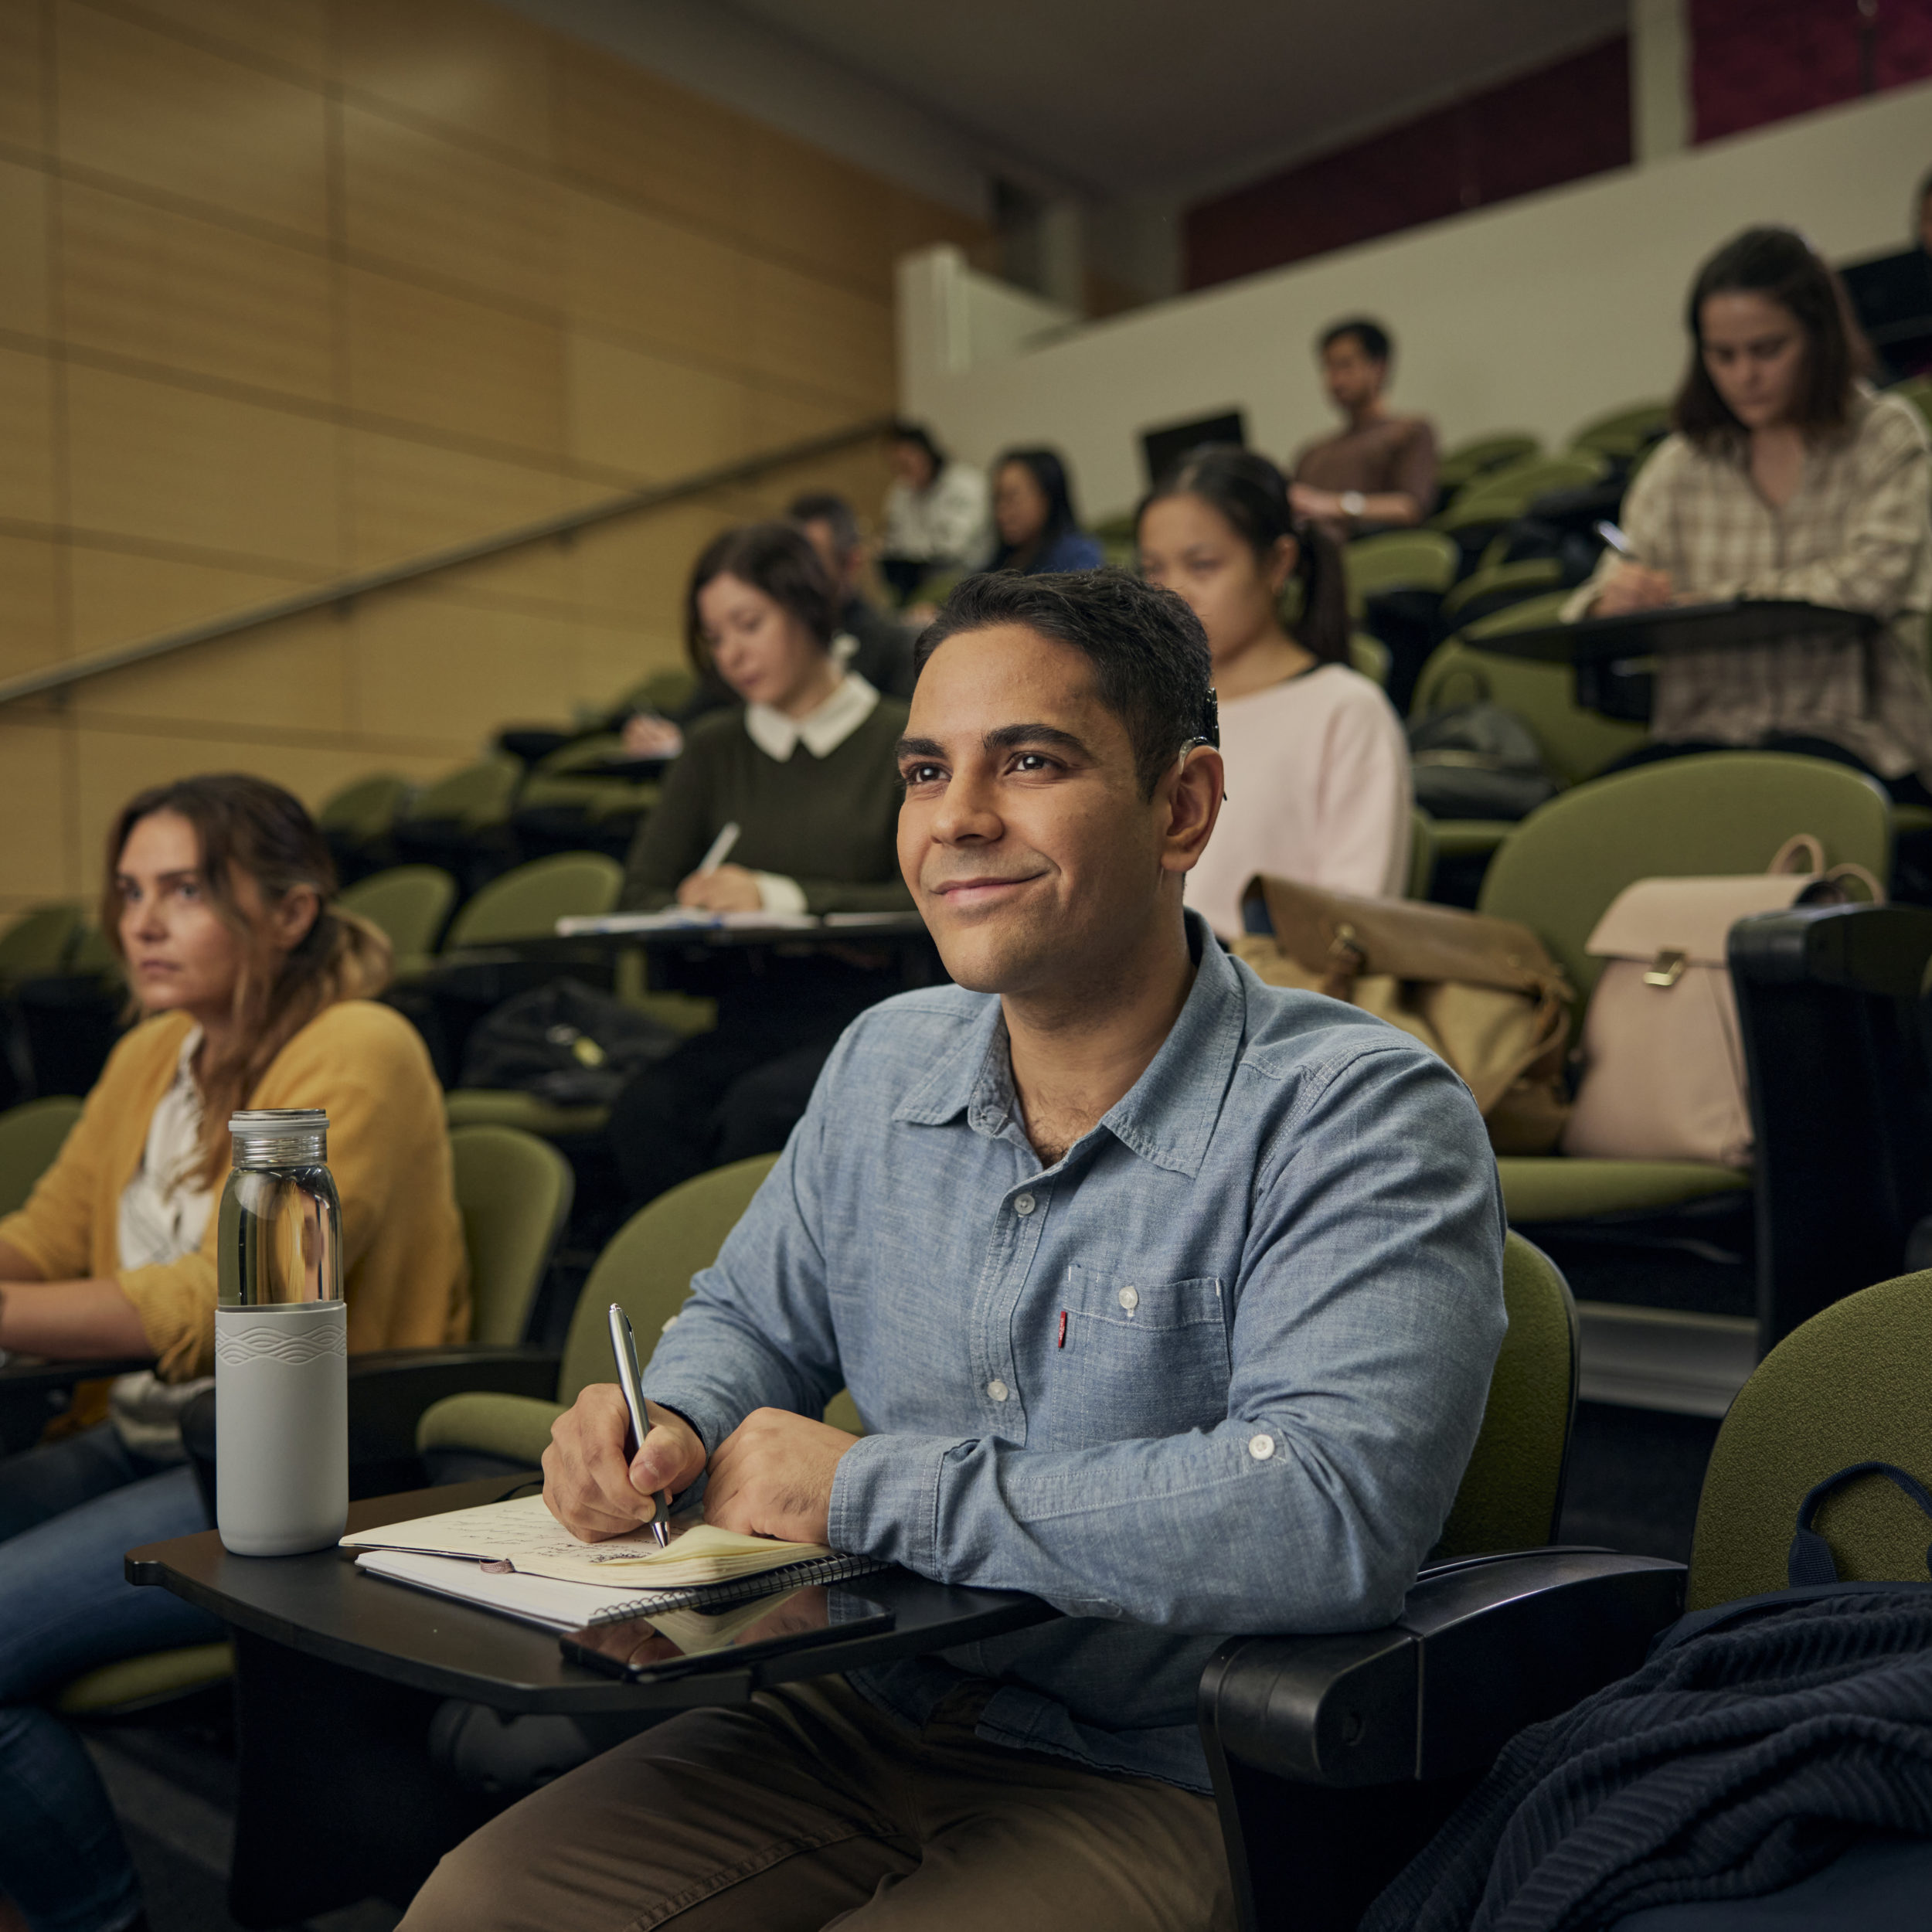 Male student sitting in lecture hall with other students writing in a notebook